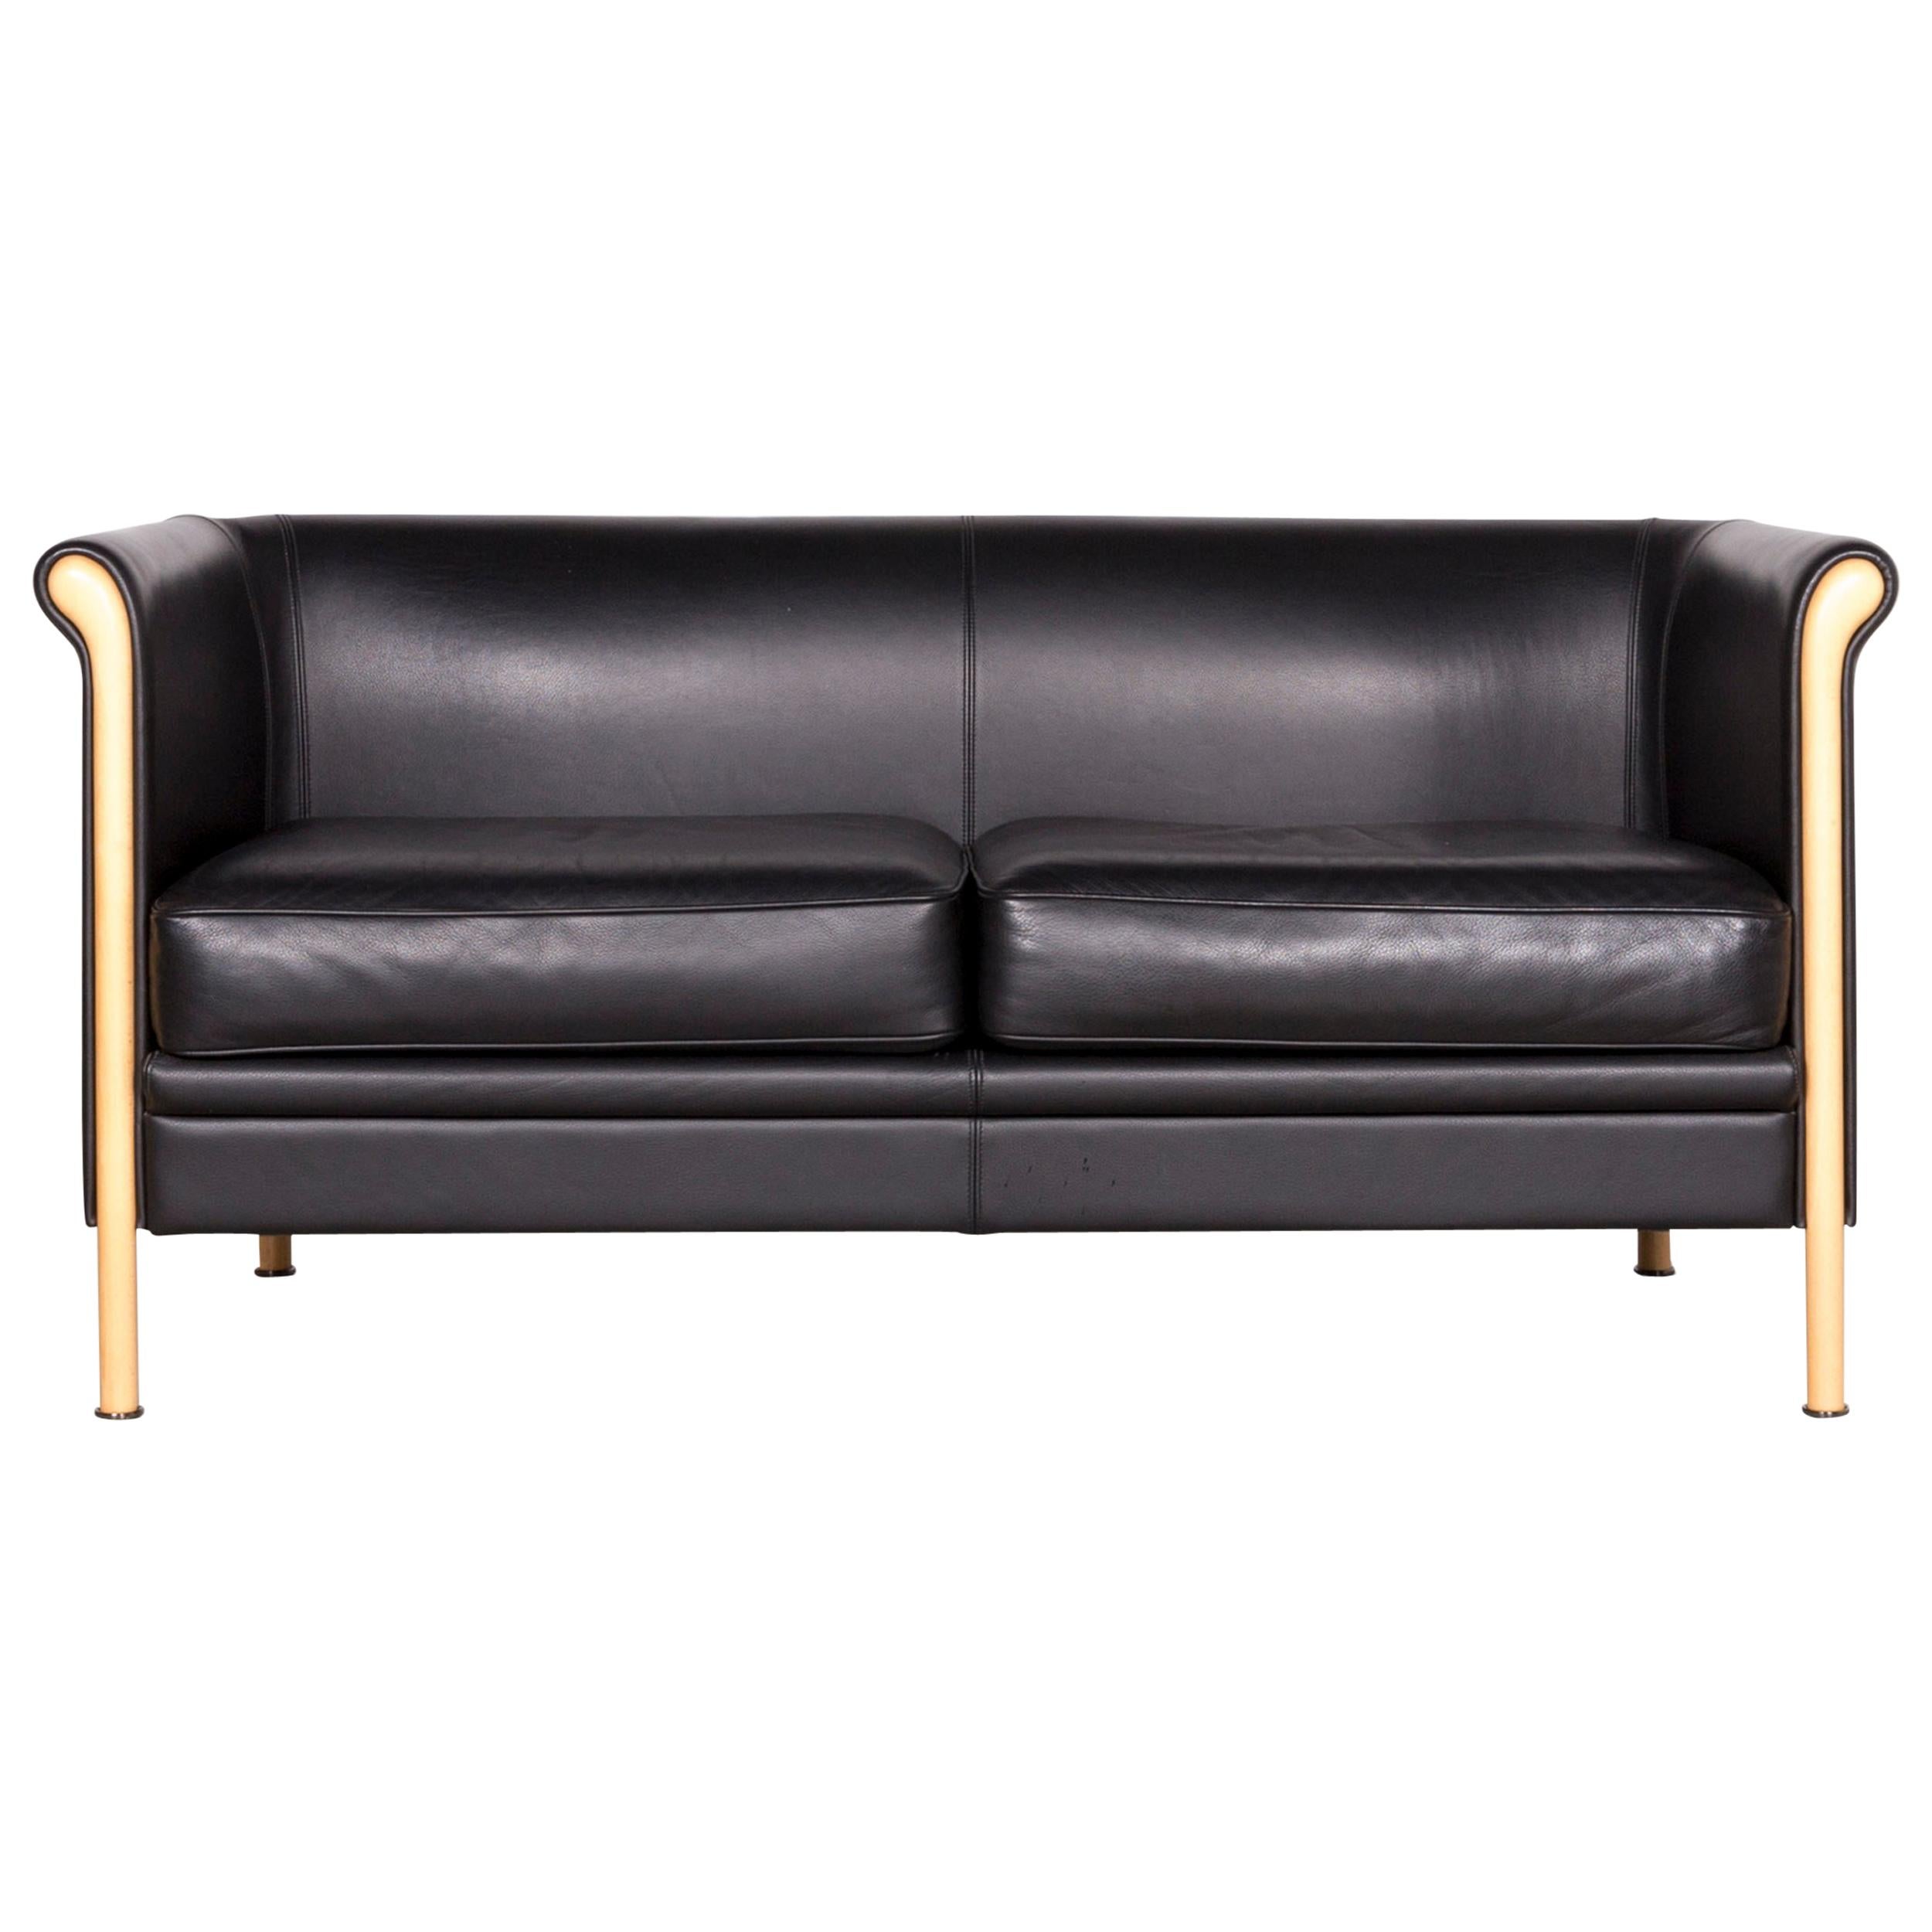 Moroso Designer Leather Sofa in Black, Two-Seat Couch For Sale